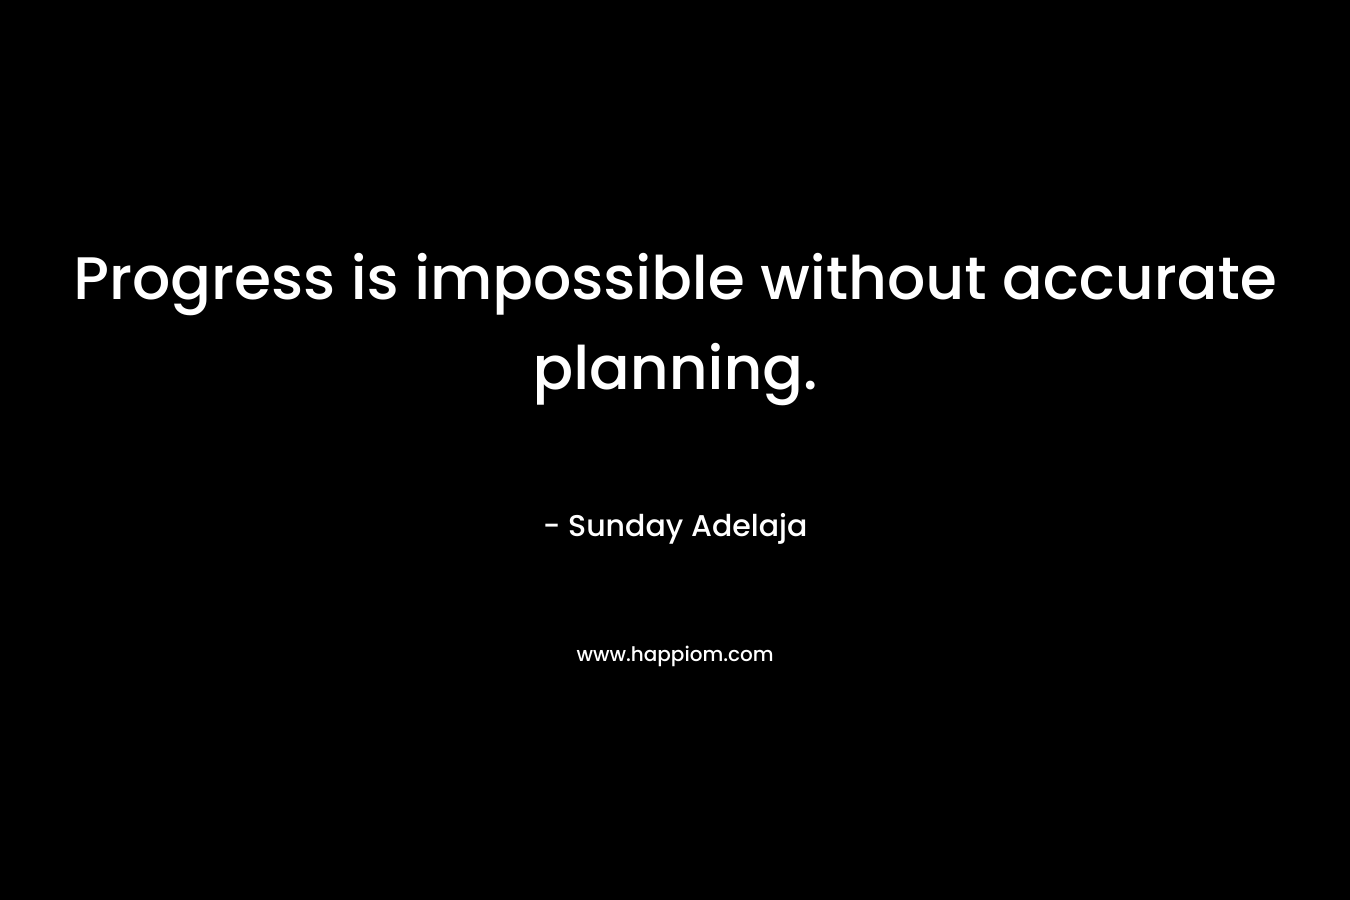 Progress is impossible without accurate planning.